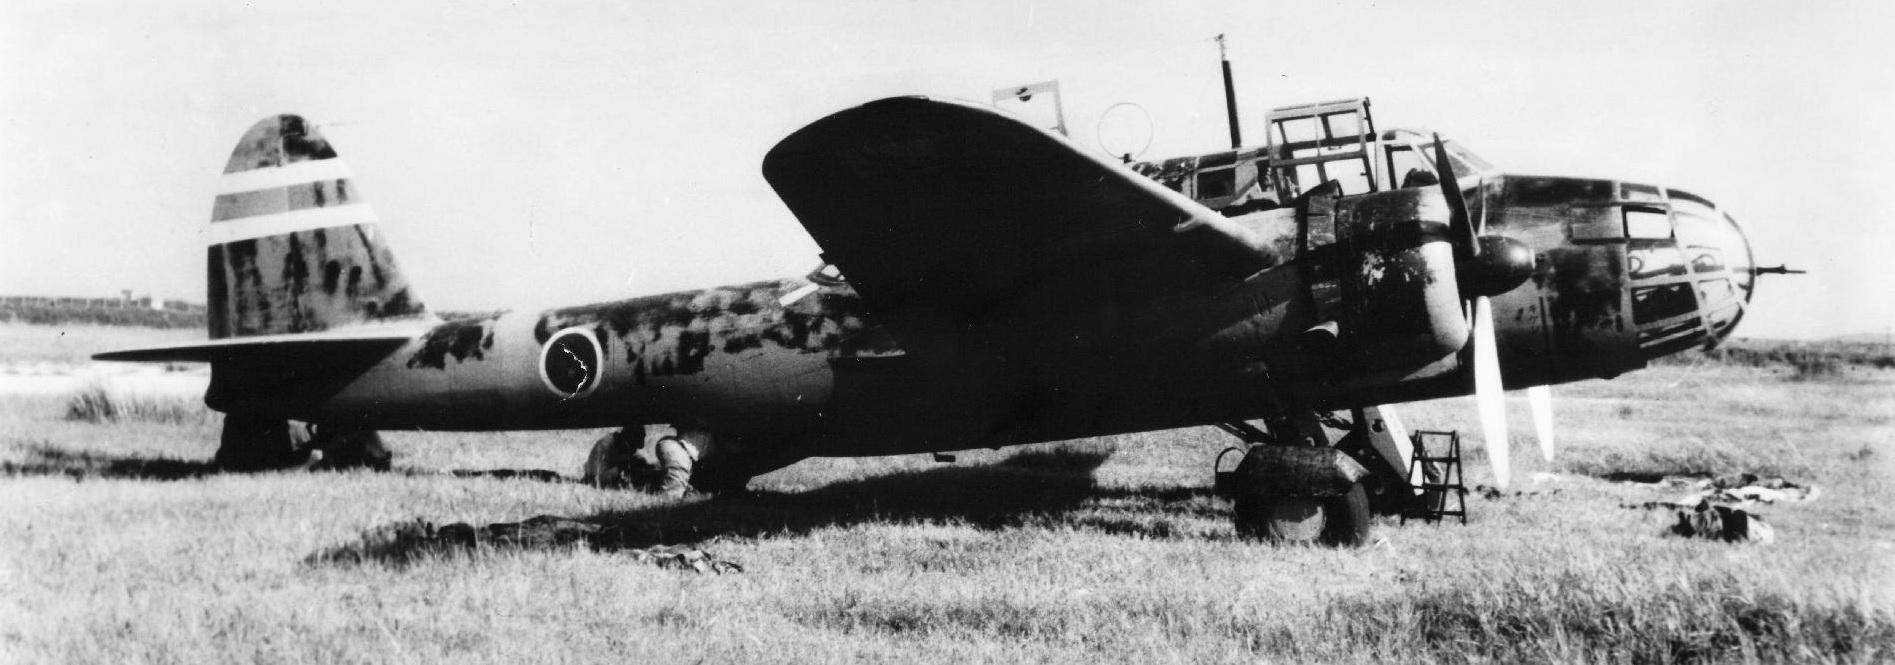 Ki-48 aircraft at rest, date unknown